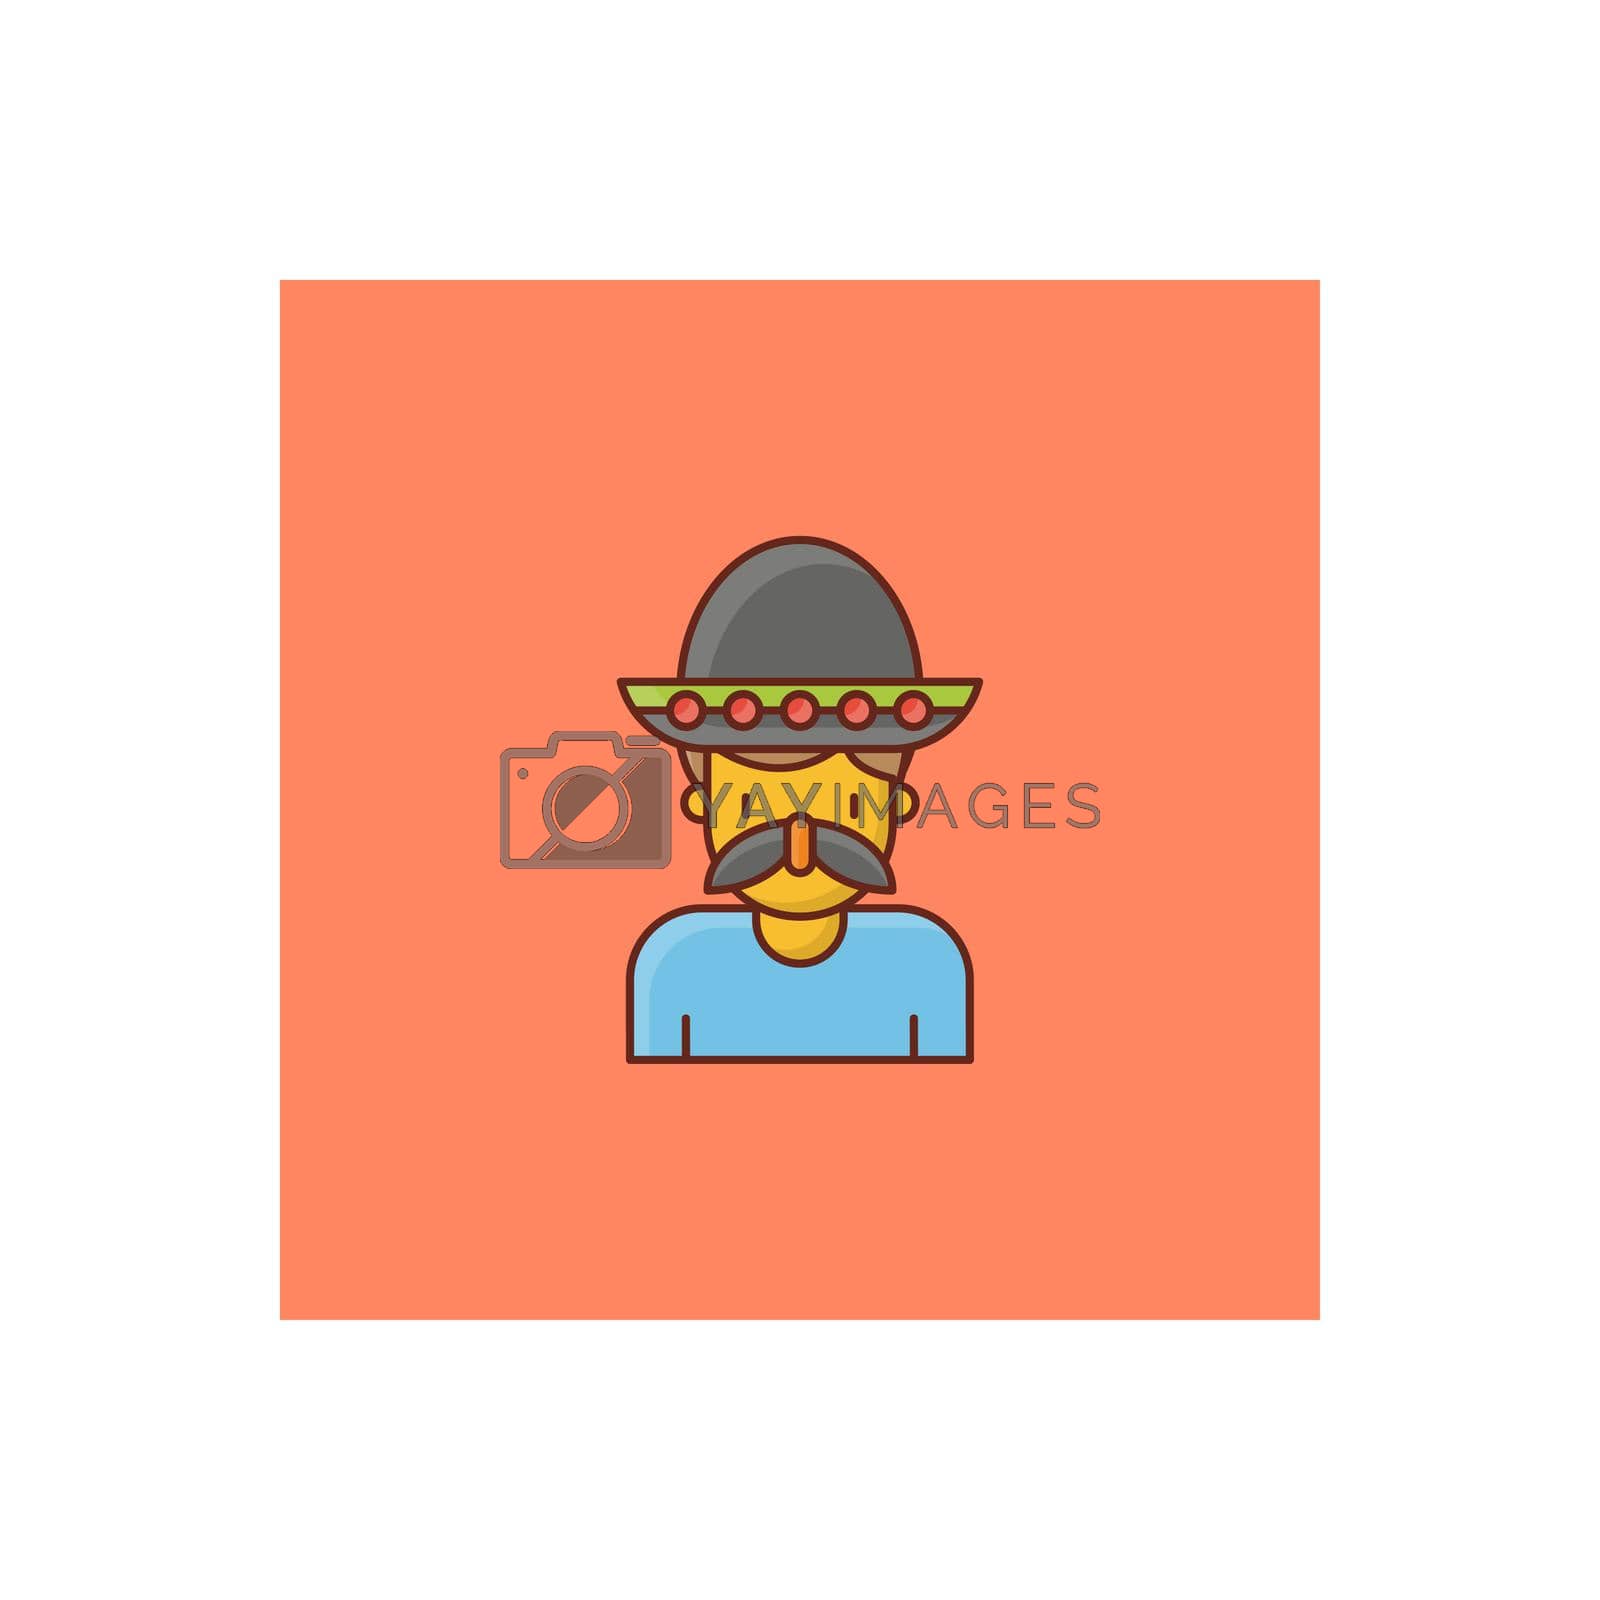 Royalty free image of dead by FlaticonsDesign